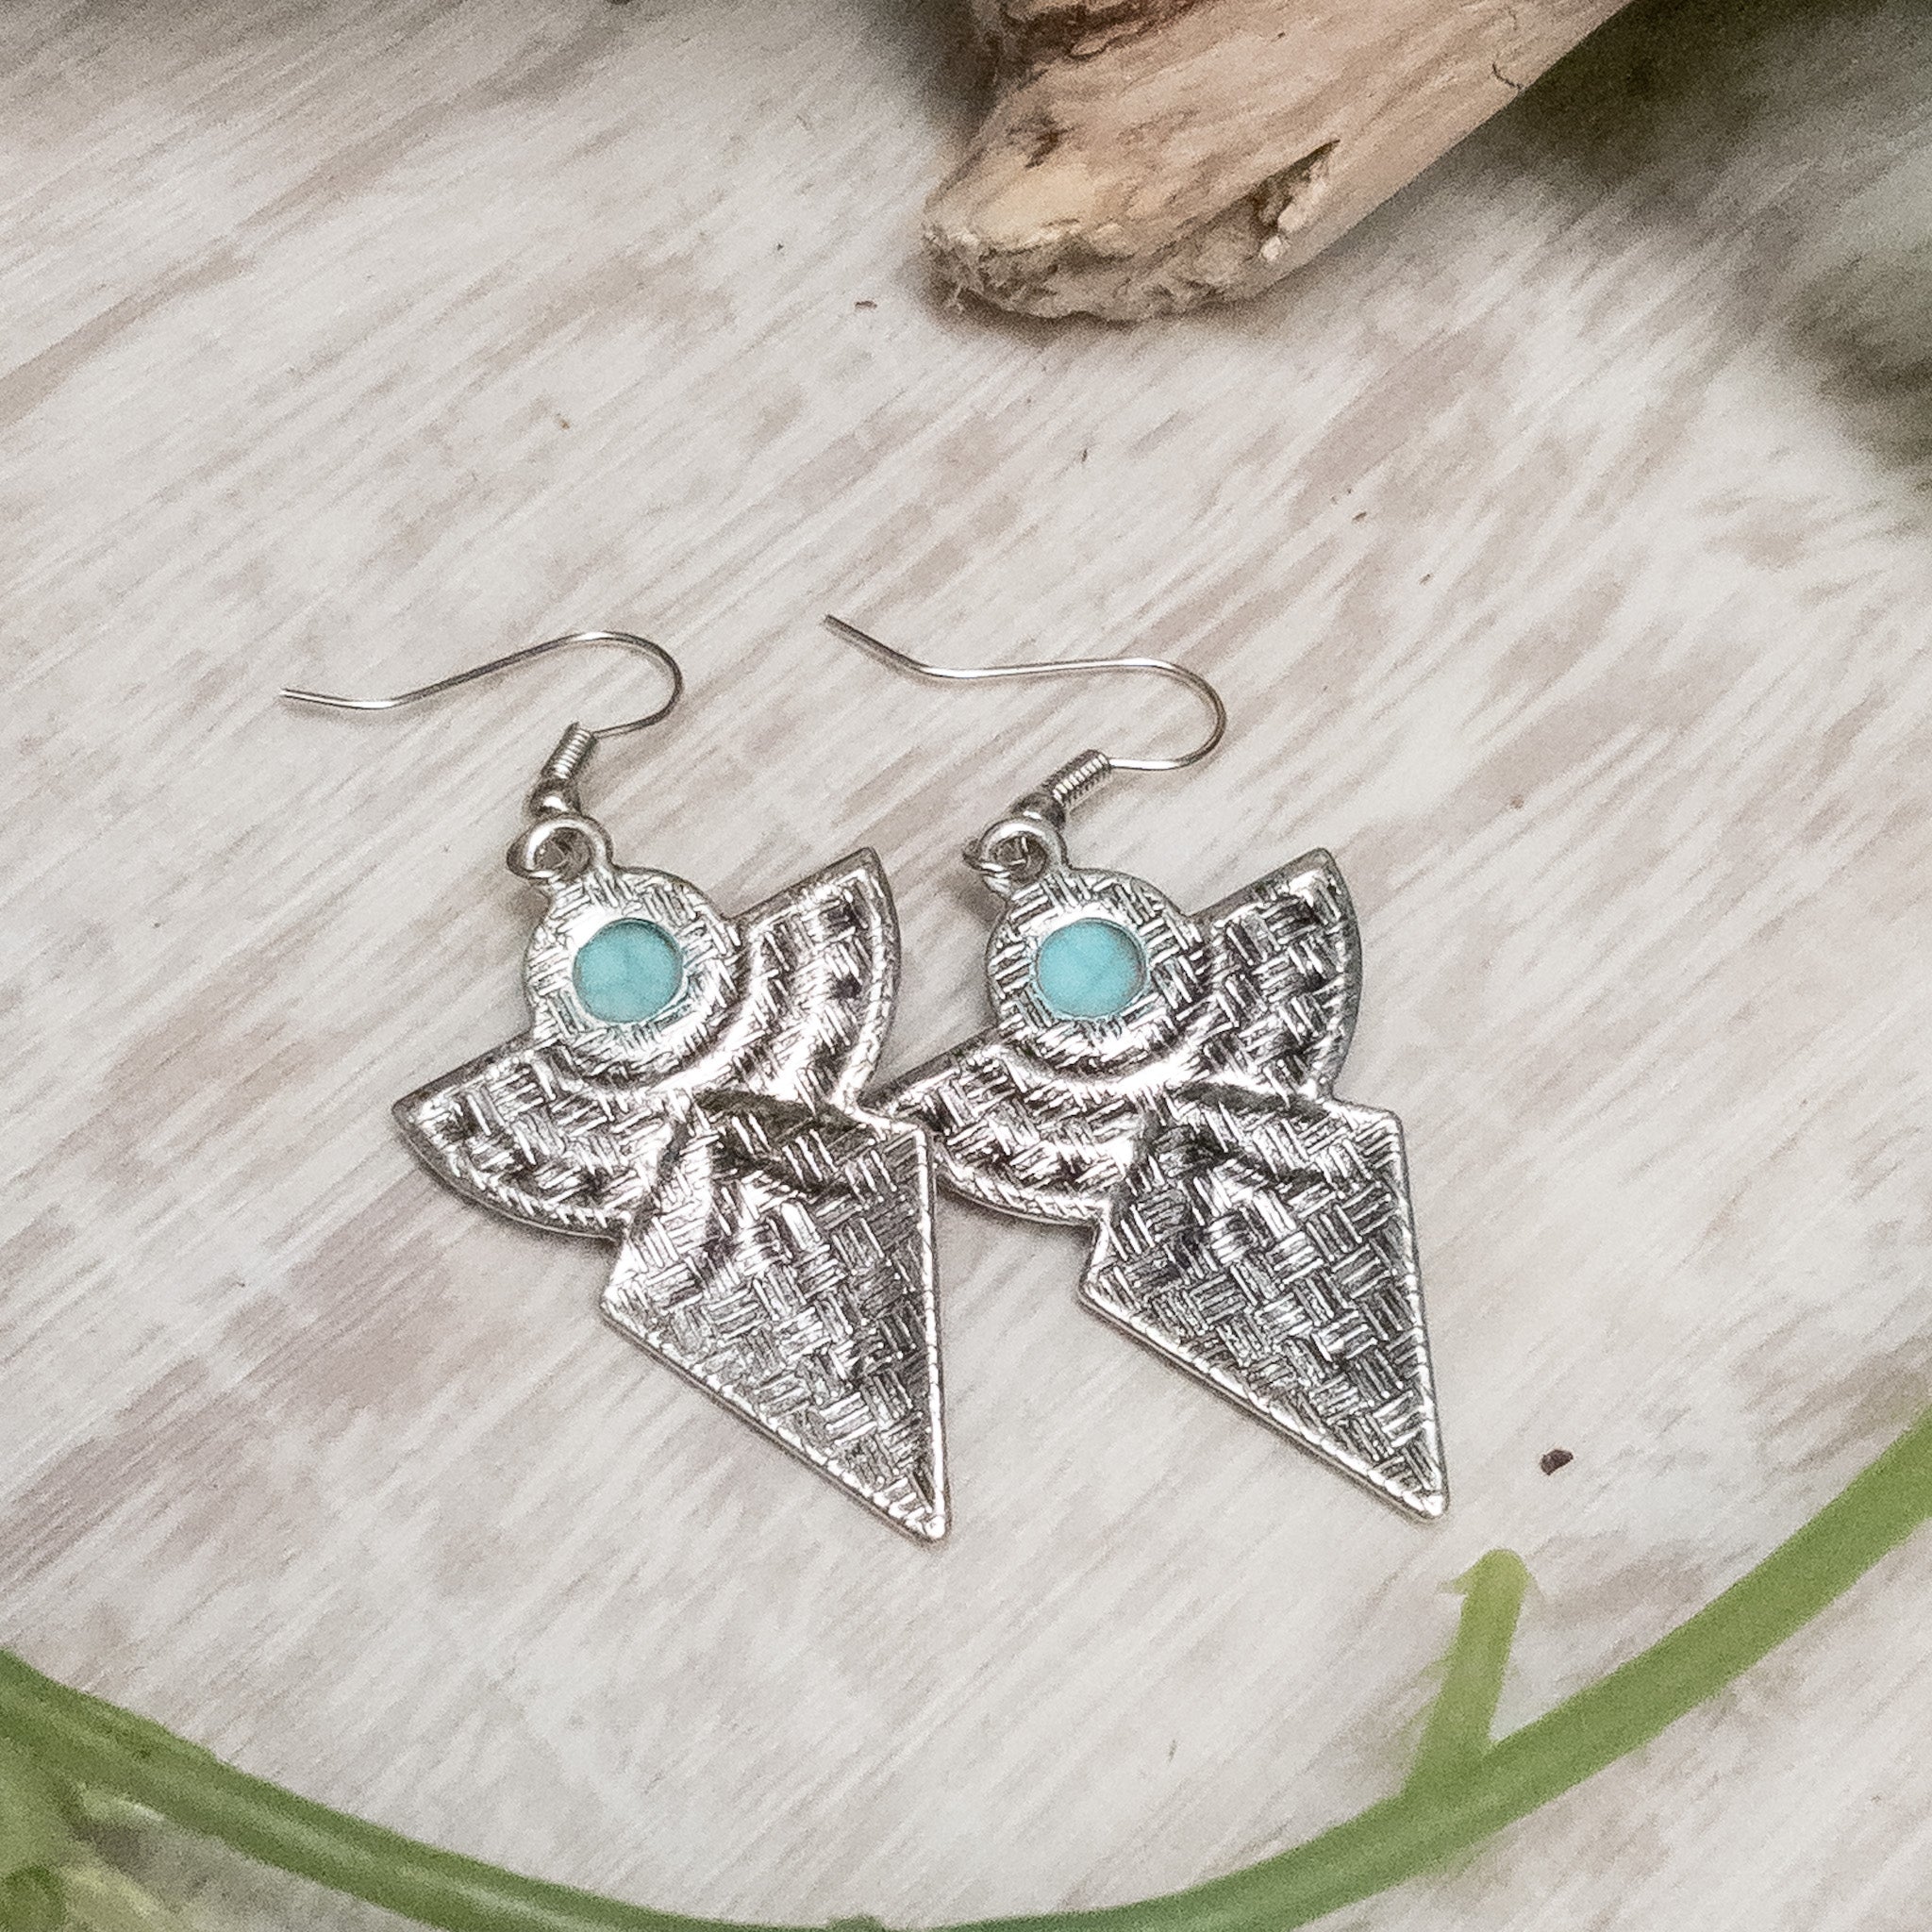 Antique Silver/Turquoise Navajo Style Shield Pendant Earrings